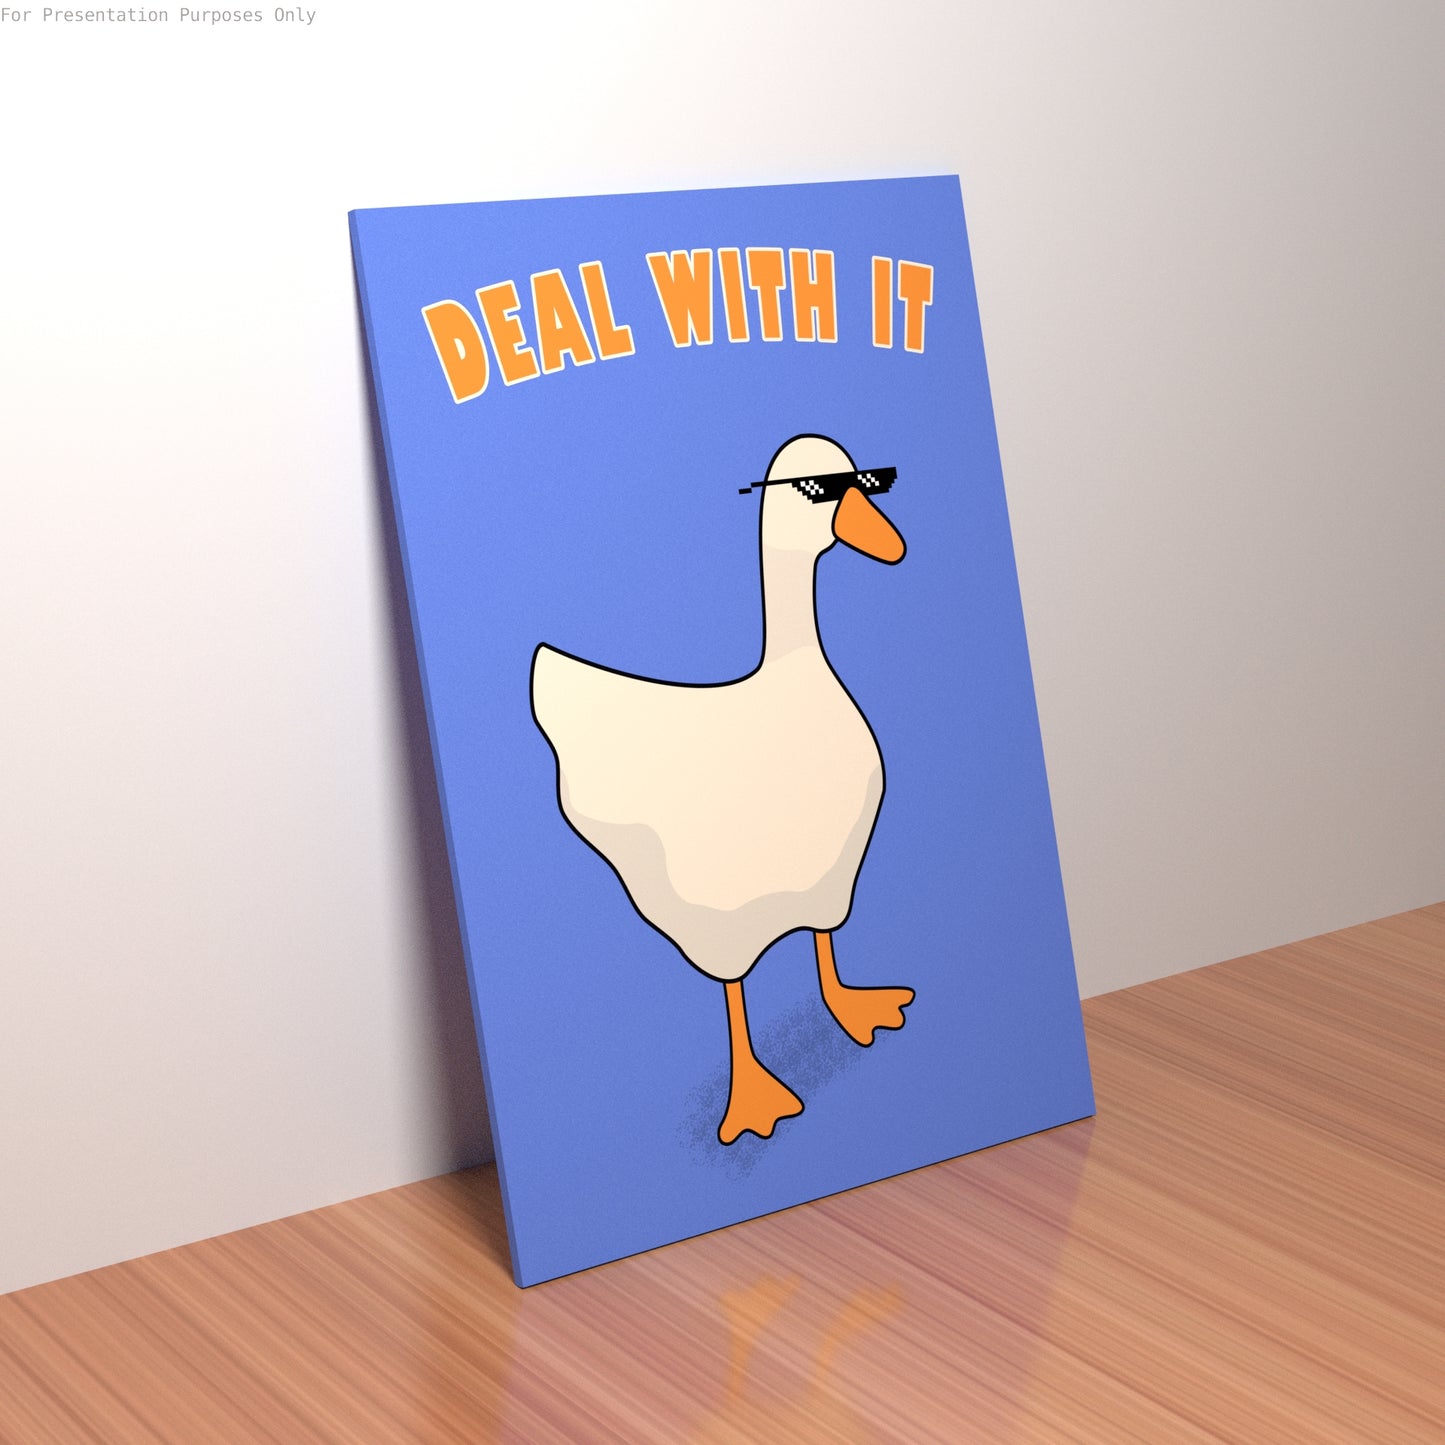 DEAL WITH IT - Thug Life Meme (Blue)